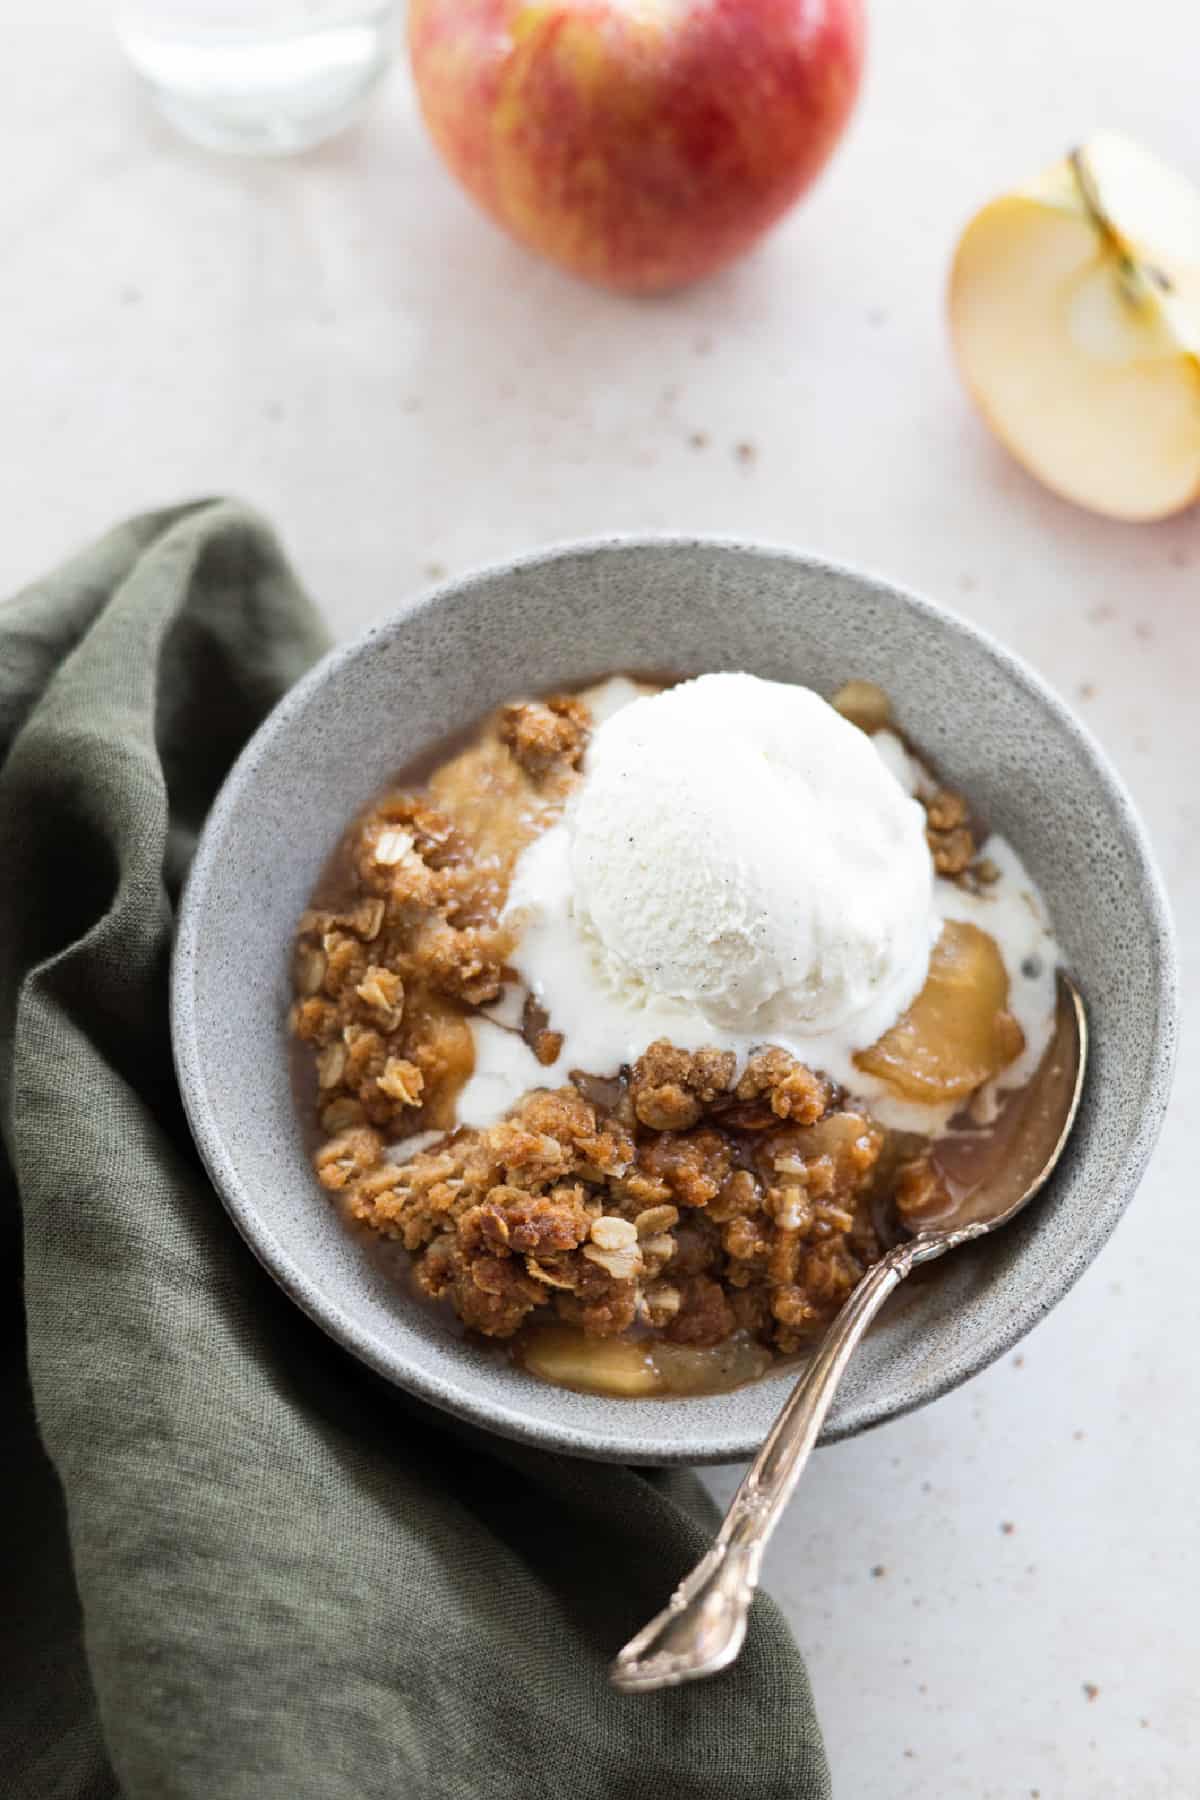 Fully baked vegan apple crisp in a bowl with ice cream on top.